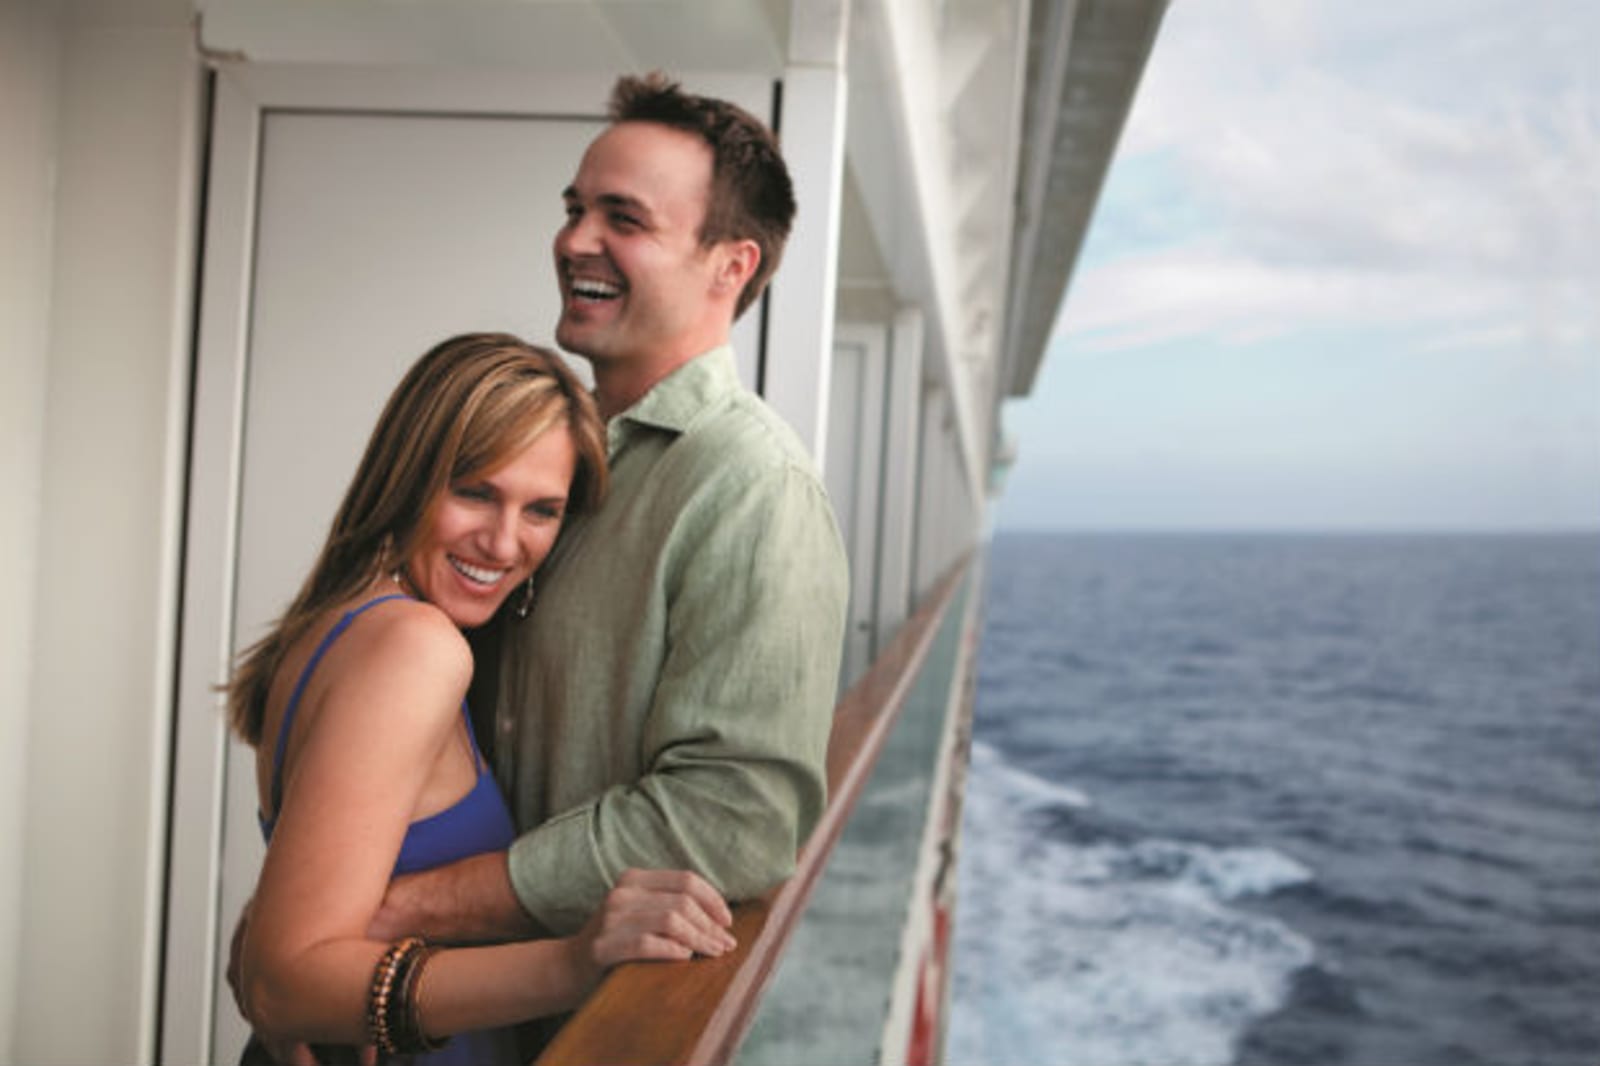 Couple smiling and embracing standing near the ocean-line on a cruise ship